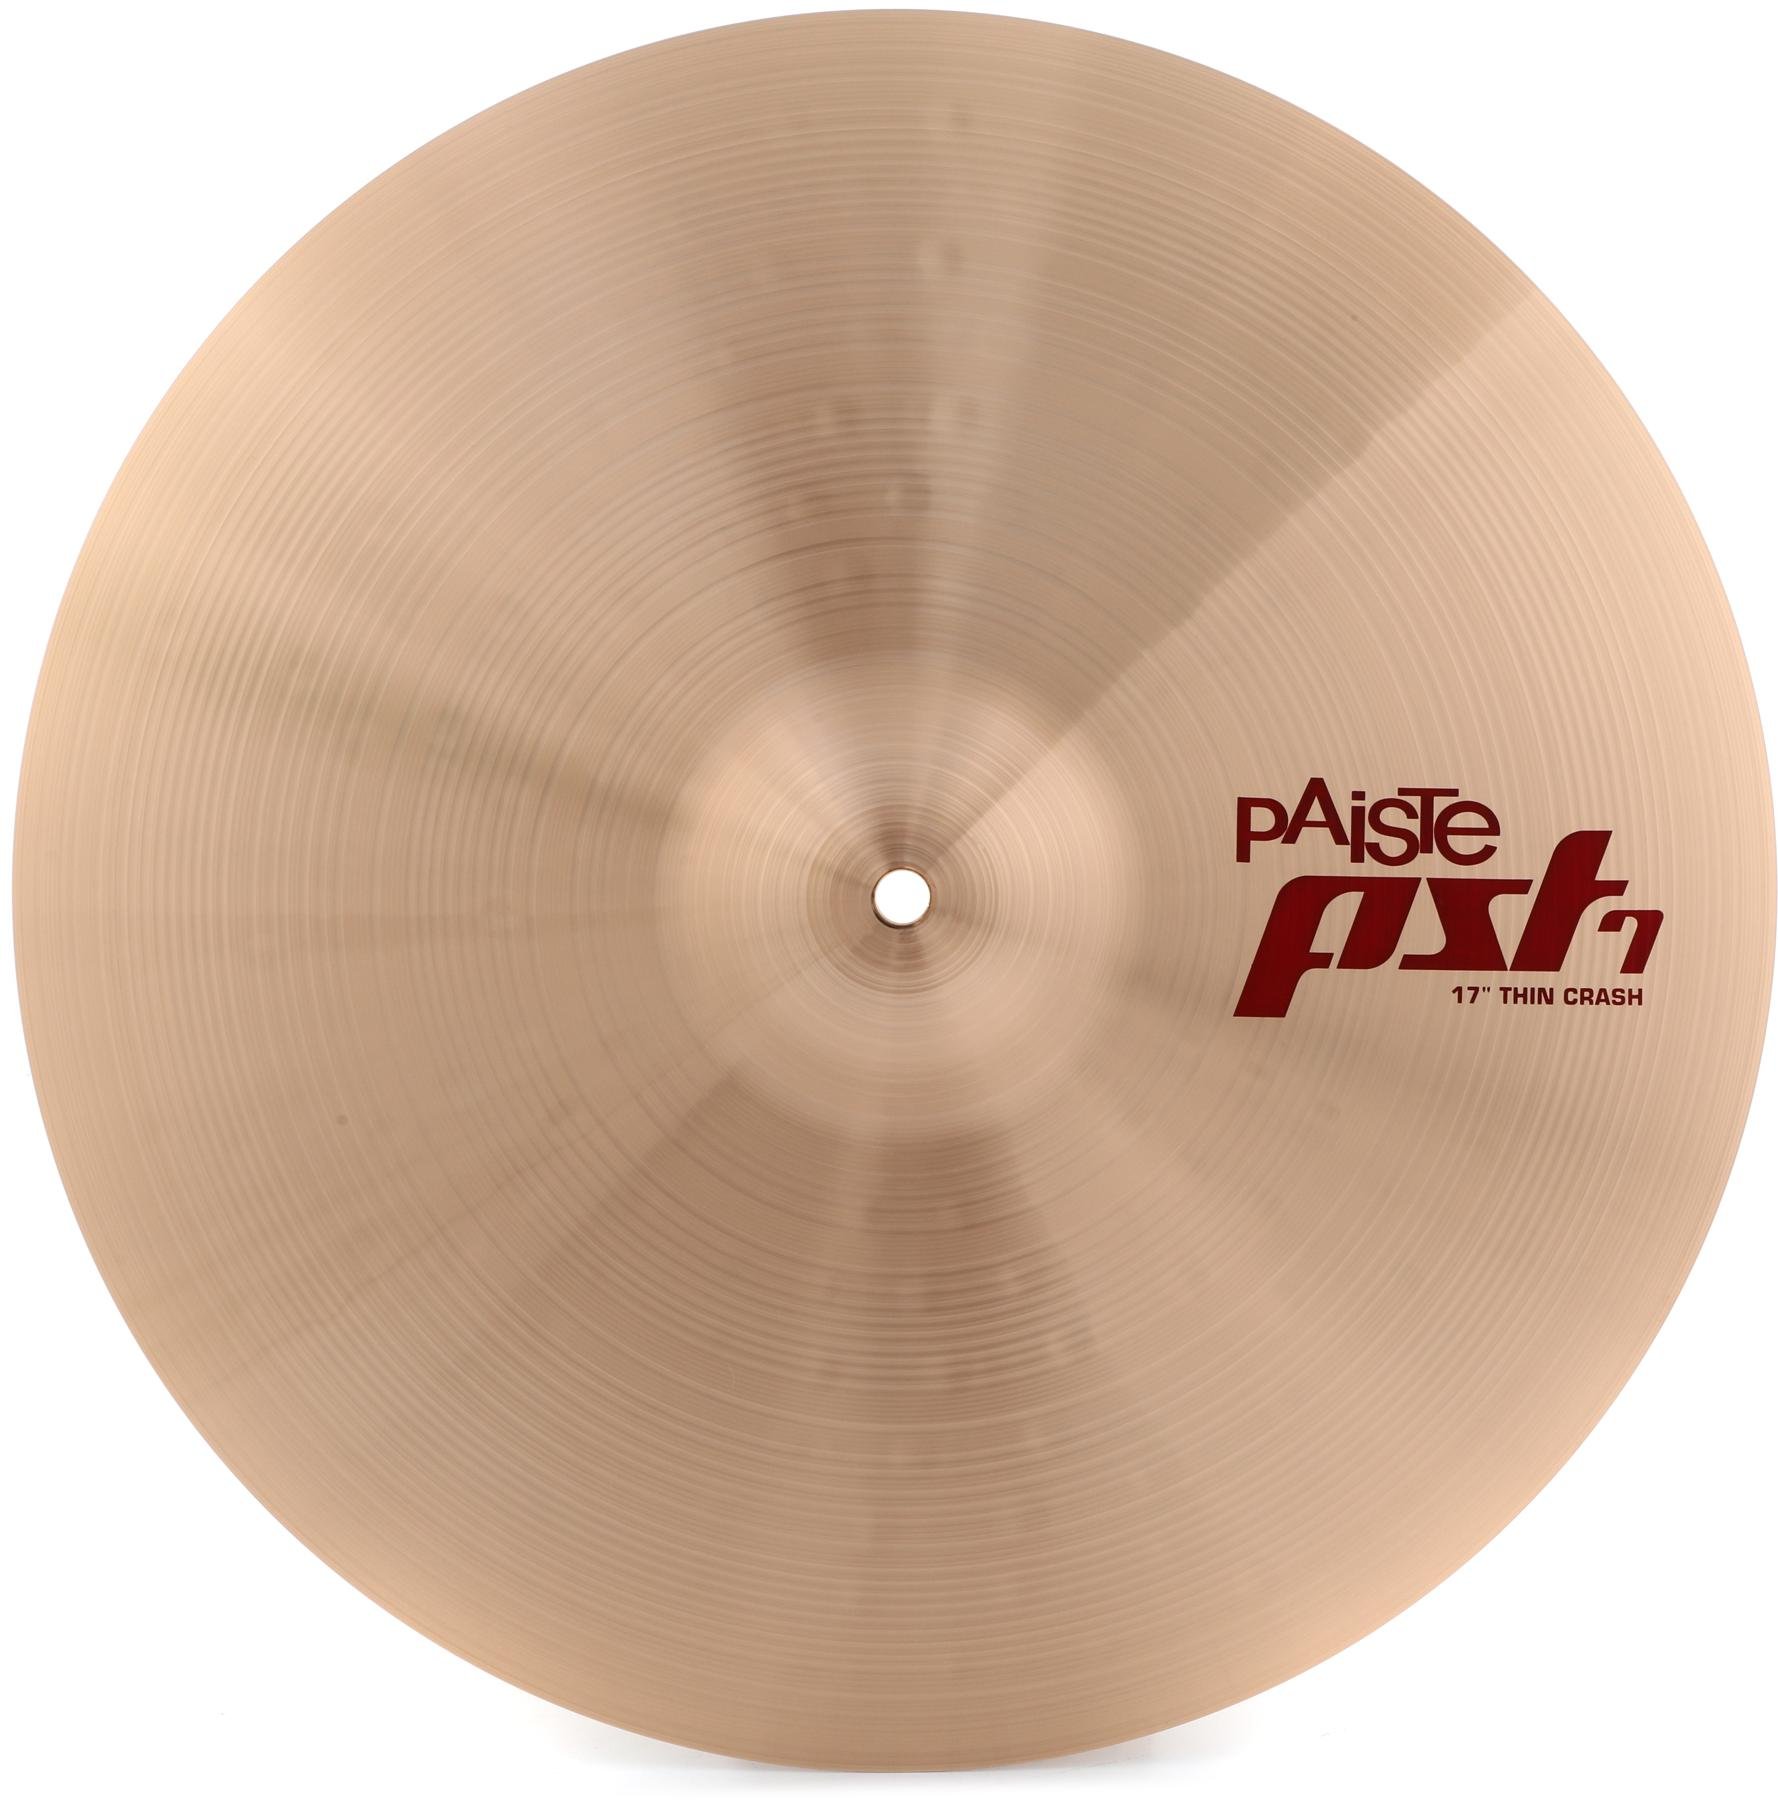 Paiste 17 inch PST 7 Thin Crash Cymbal | Sweetwater